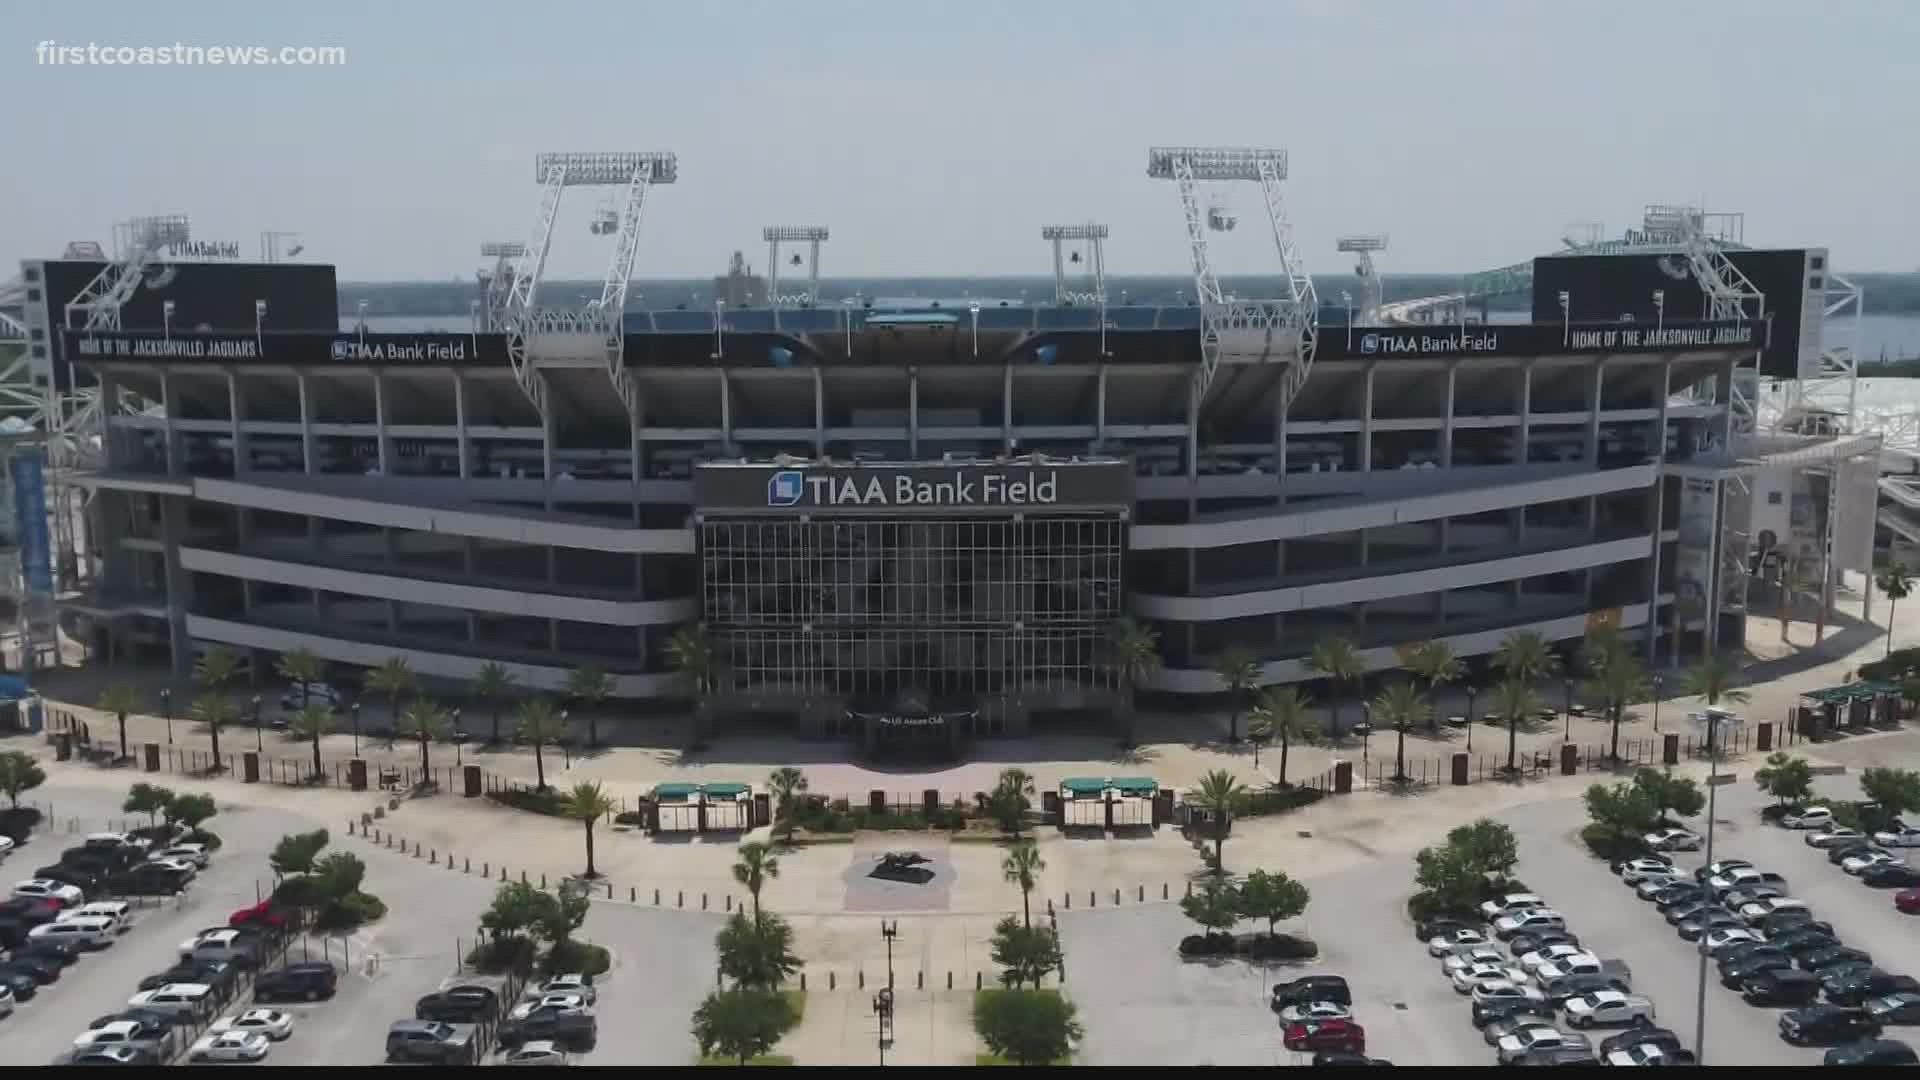 Football season is officially back, and so are the Jacksonville Jaguars!